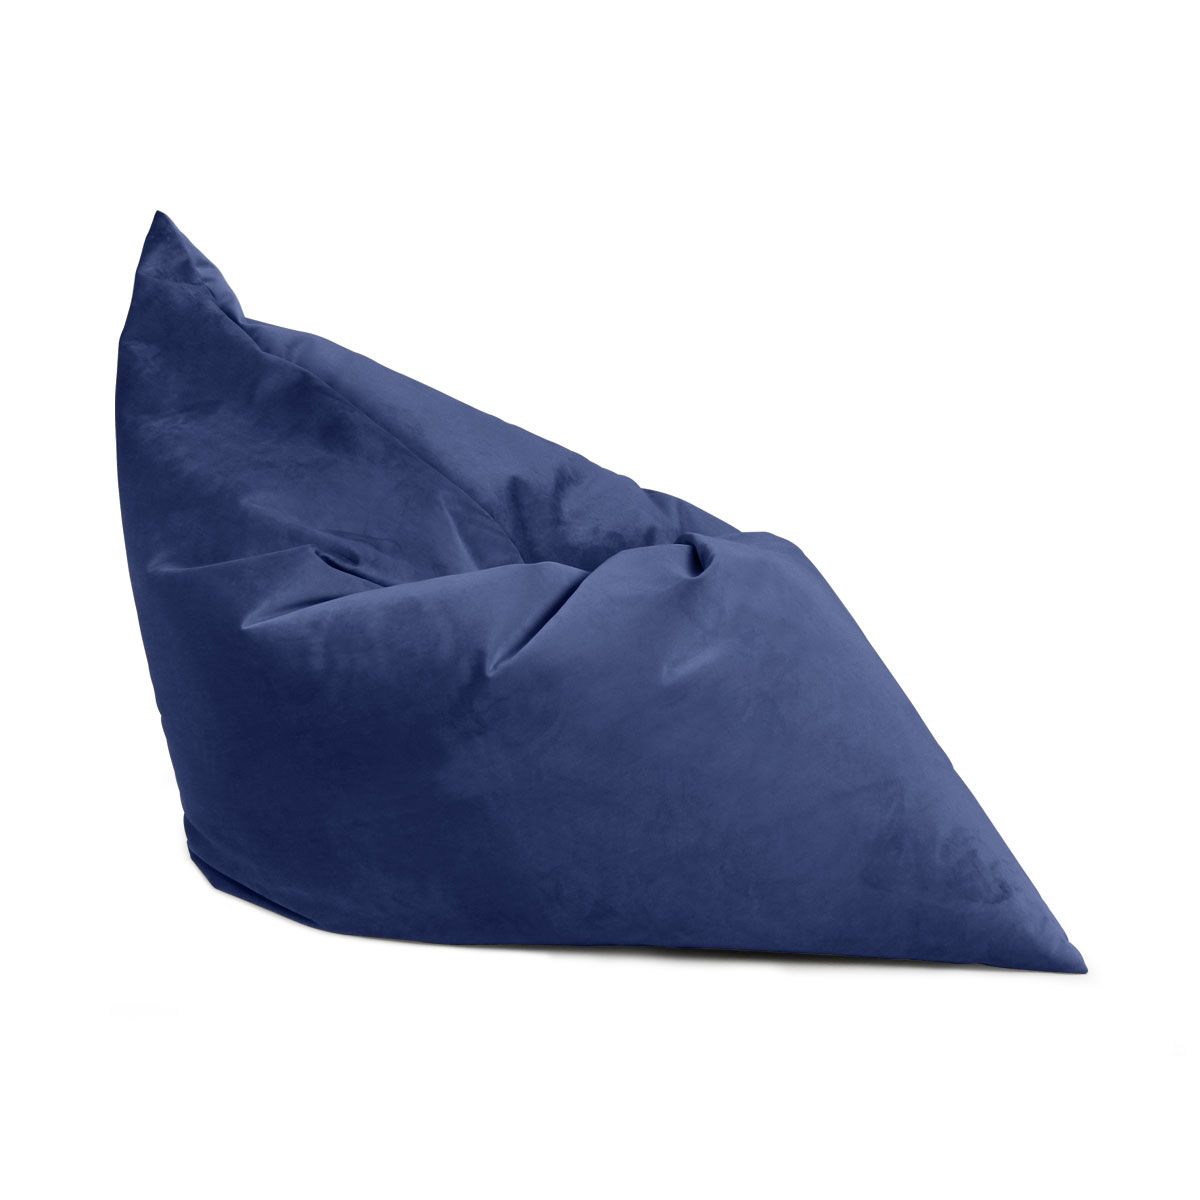 beanbag branded, beanbag branded Suppliers and Manufacturers at